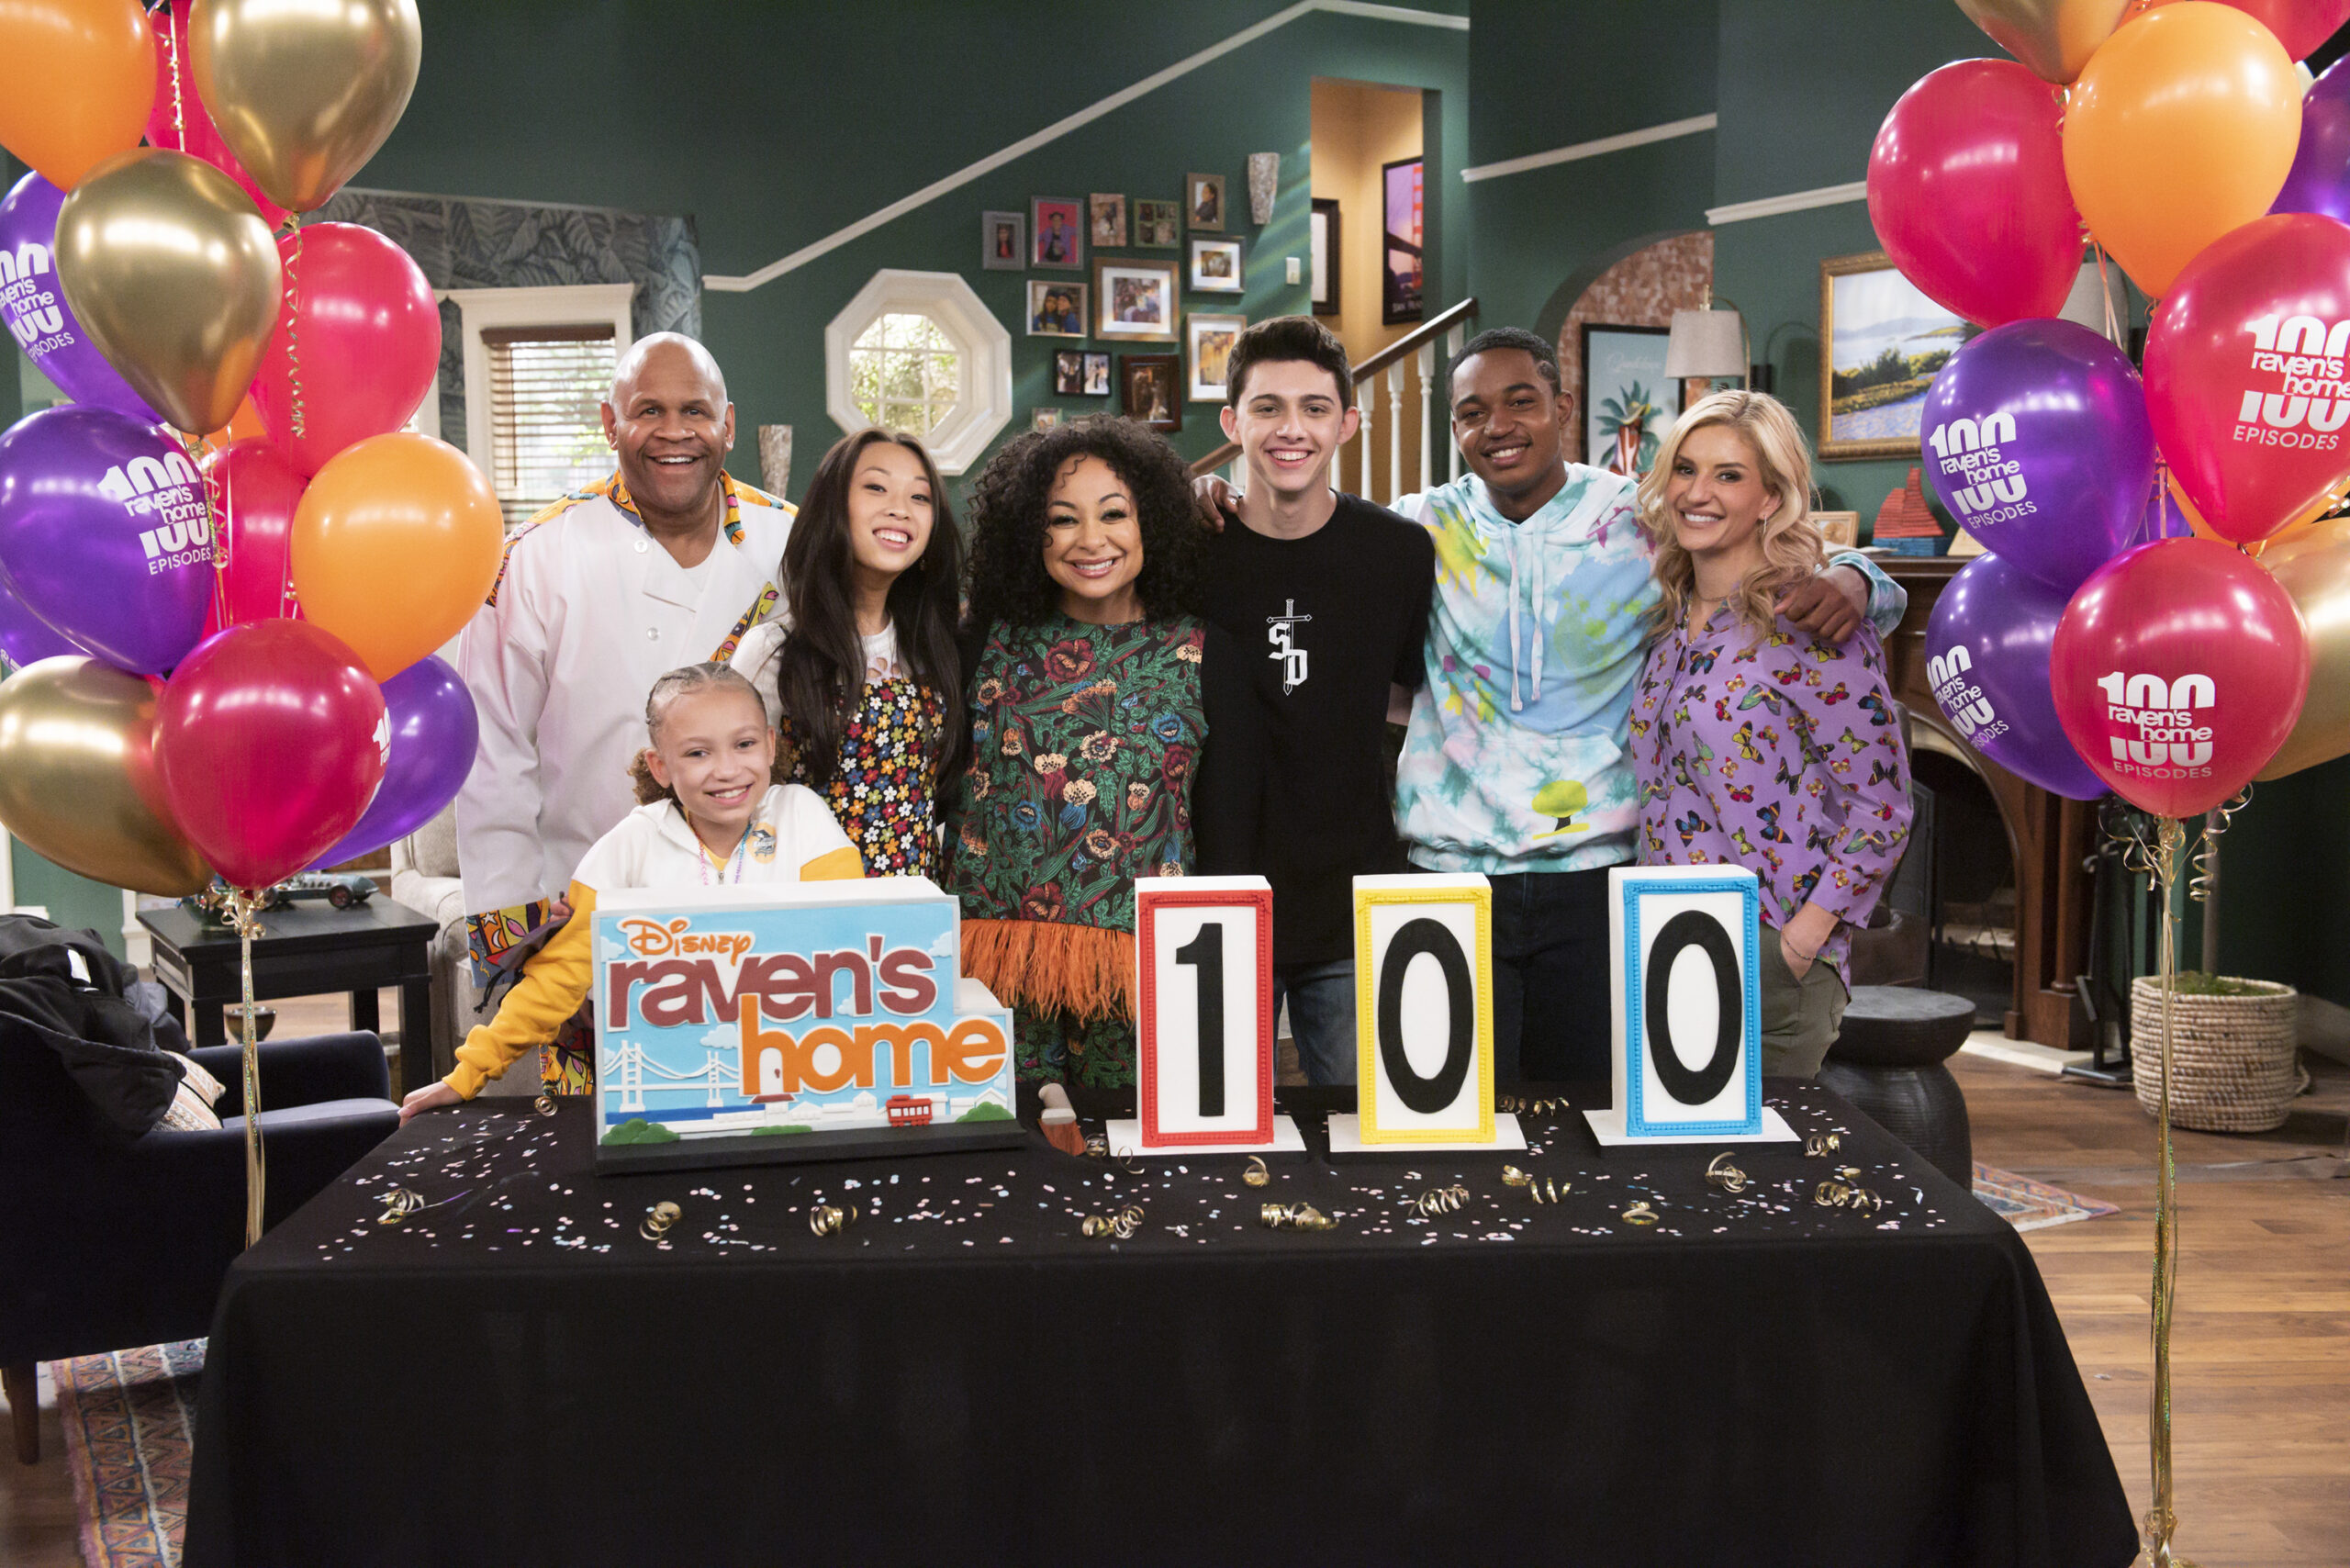 Raven-Symoné On Defeating The Reboot Curse With ‘Raven’s Home’: ‘It’s So Real’